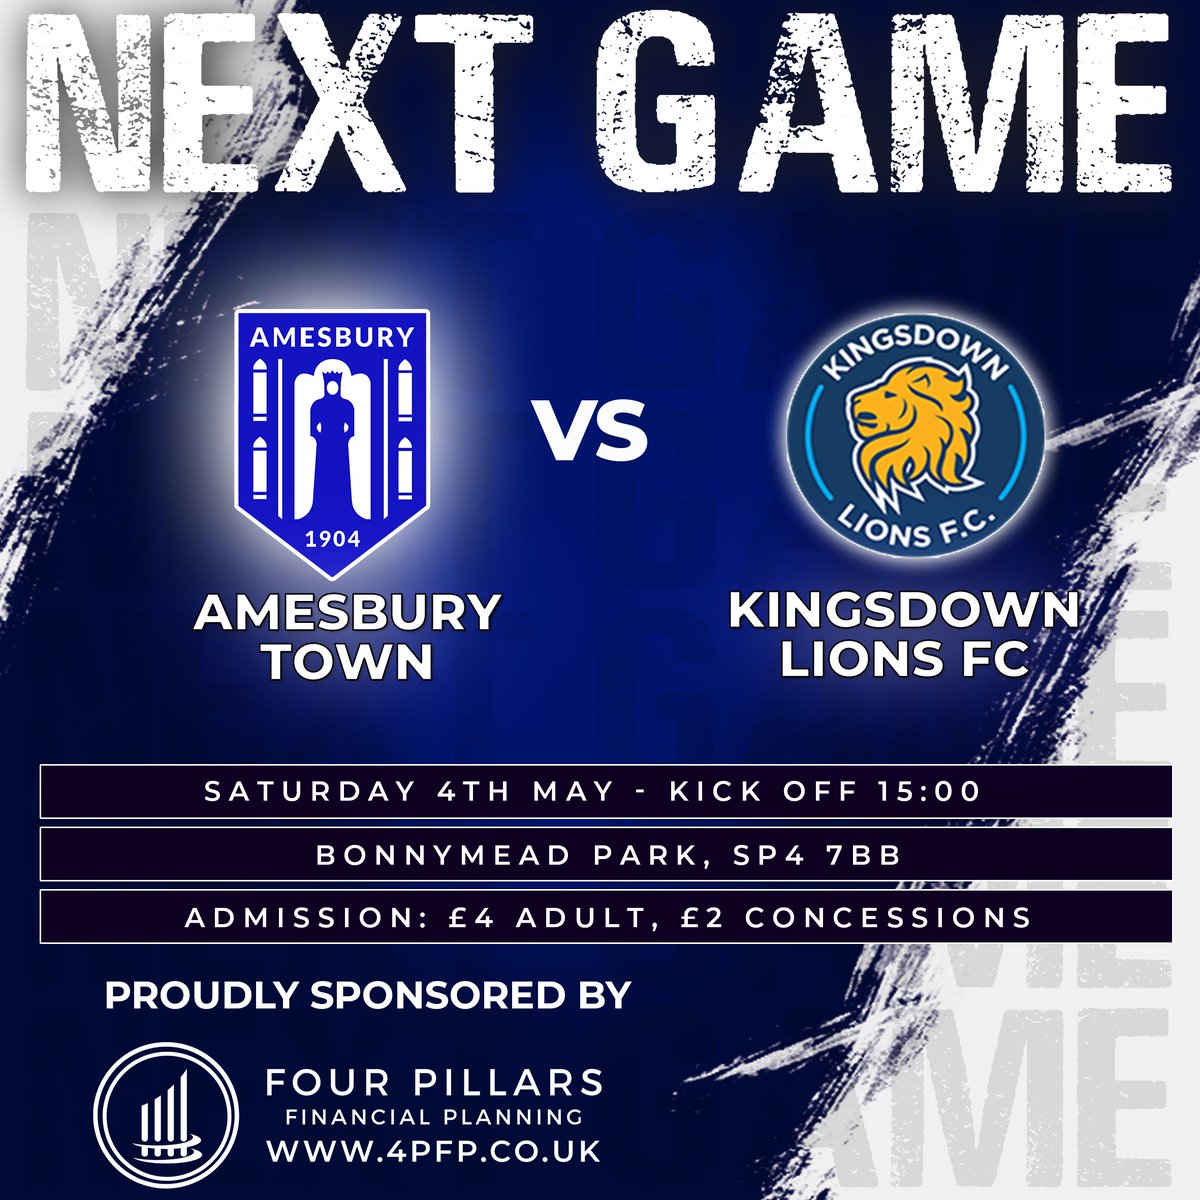 𝗡𝗘𝗫𝗧 𝗨𝗣 This saturday we face Kingsdown at home & finally get our hands on the 🏆 We hope to see a big crowd & to share a drink after to celebrate Printed programme📖 Bar open🍺 🆚:@Kingsdownlions 🏆:@WiltsLeague 📌:Bonnymead Park, SP4 7BB ⏰:15:00 💵:£4 Adults,£2 Conc